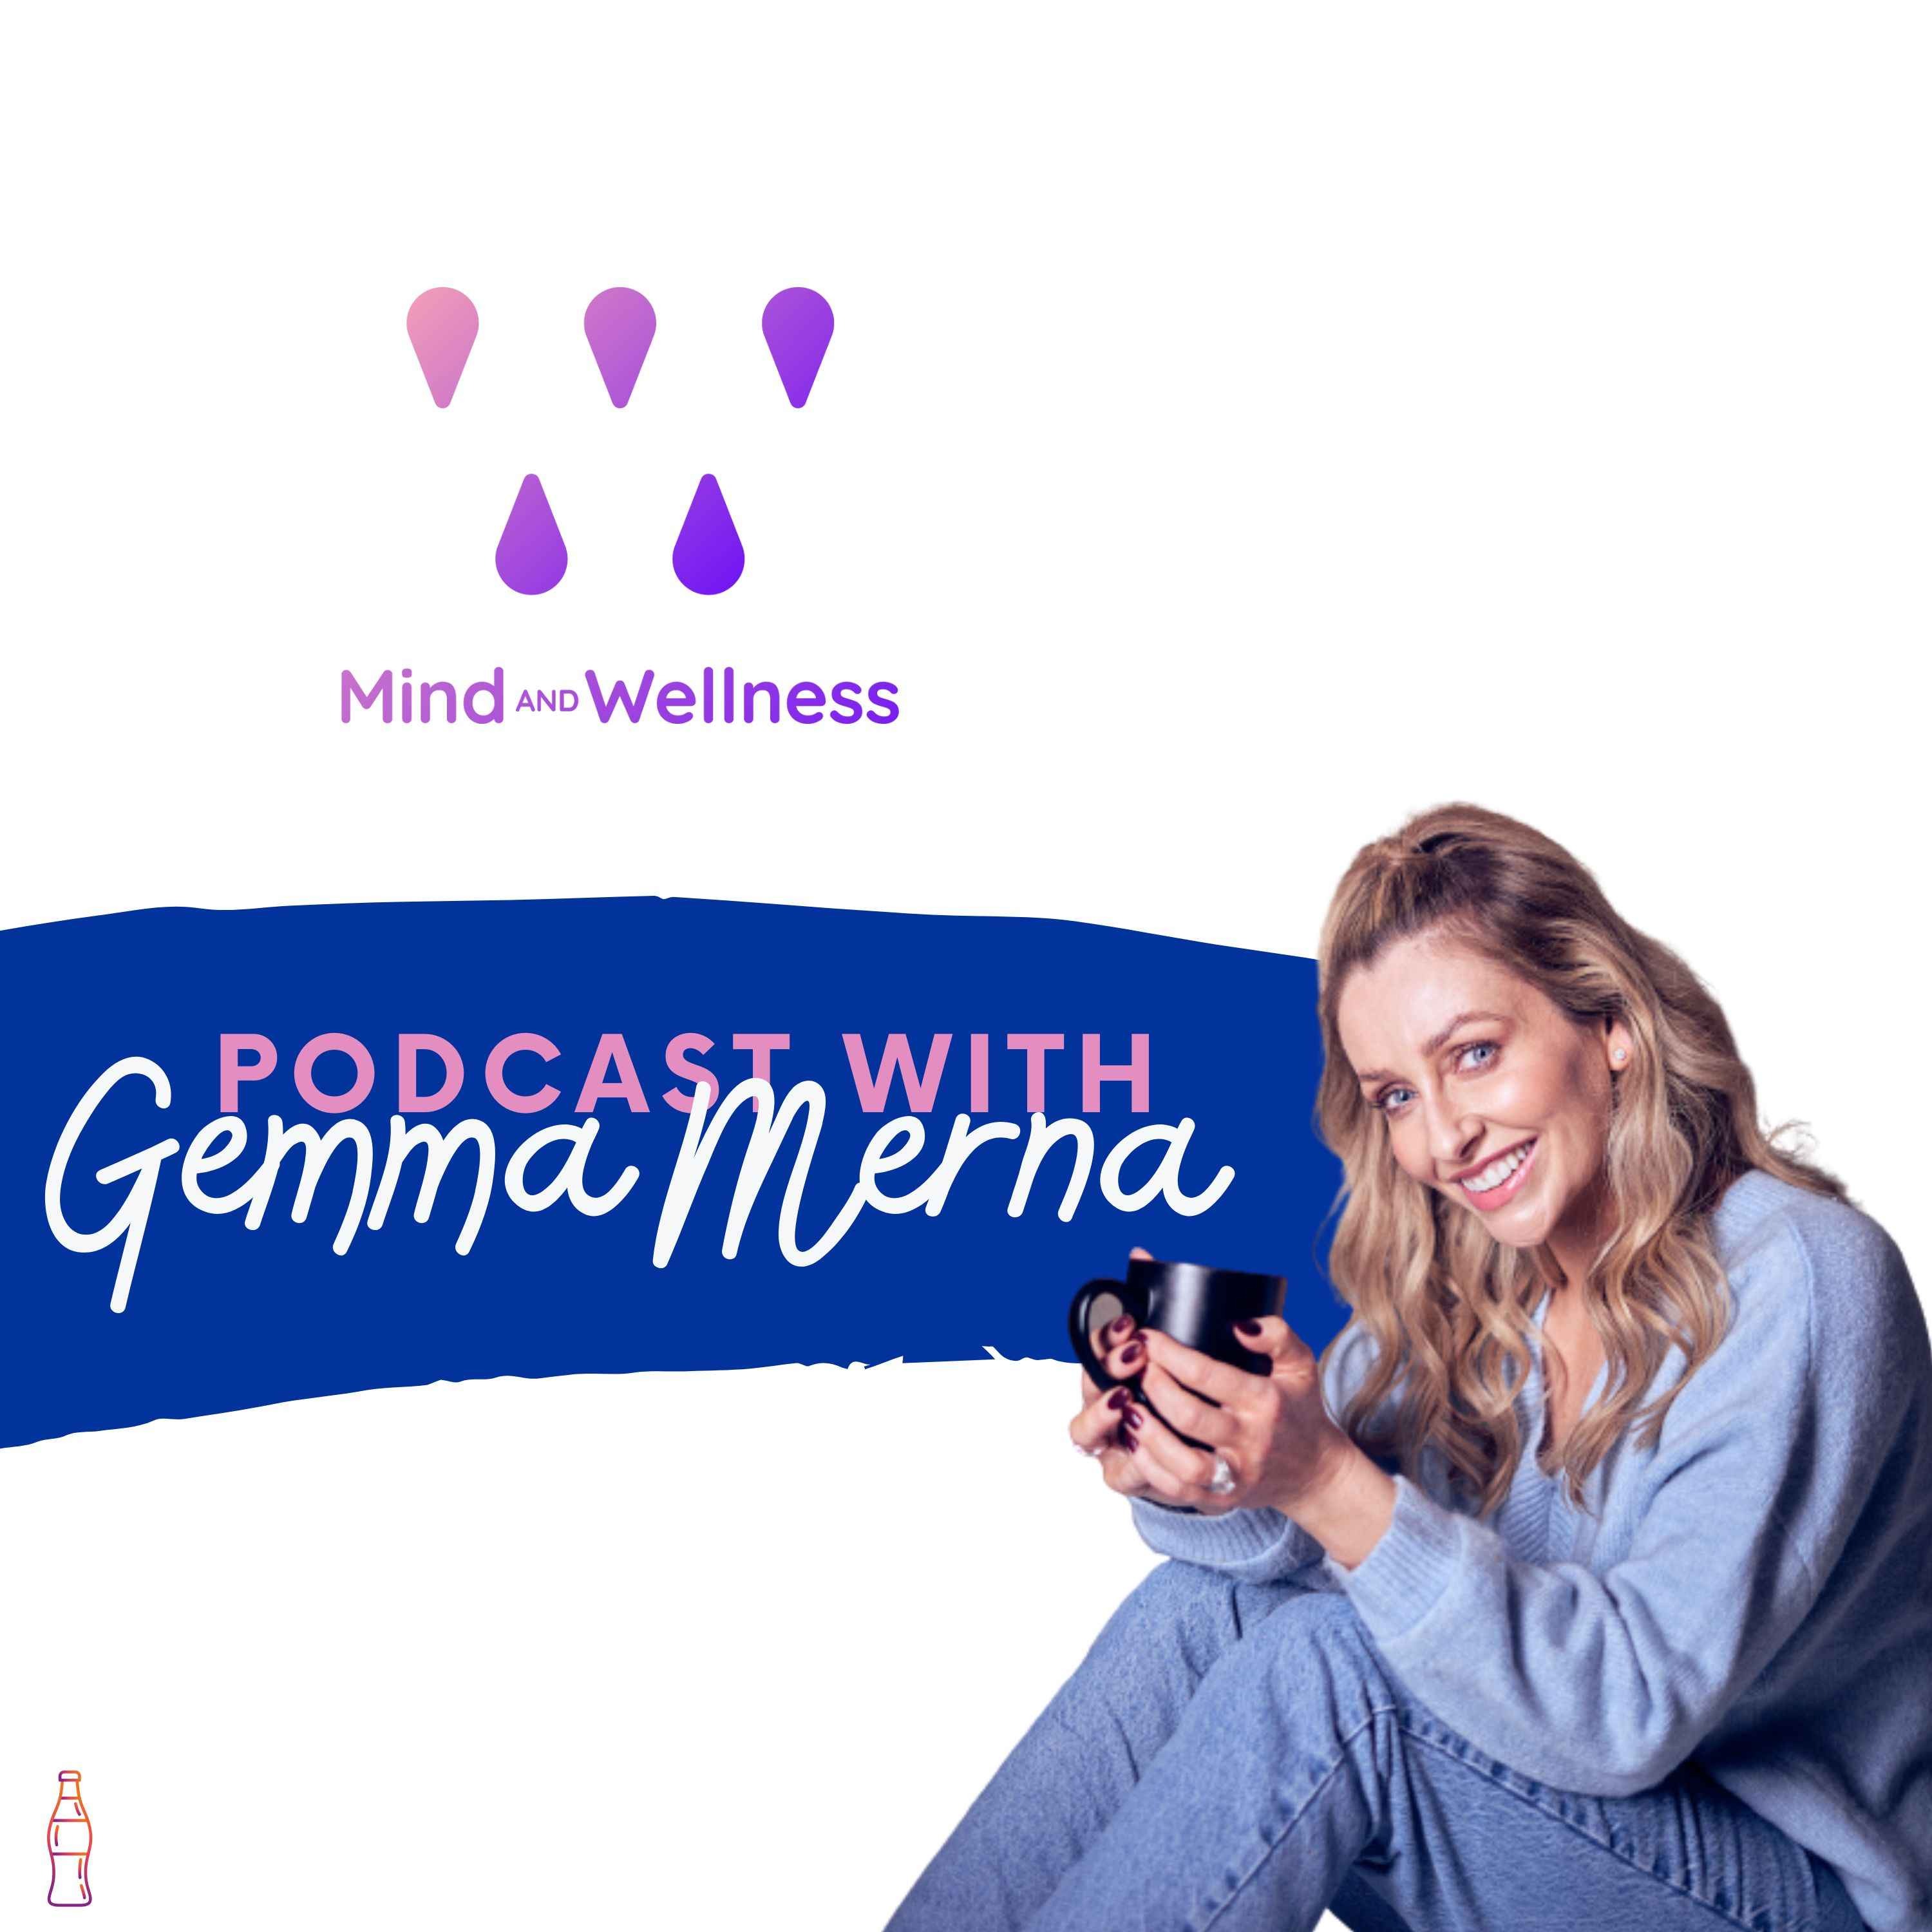 mind-and-wellness-podcast-episode-1-what-is-stress-mind-and